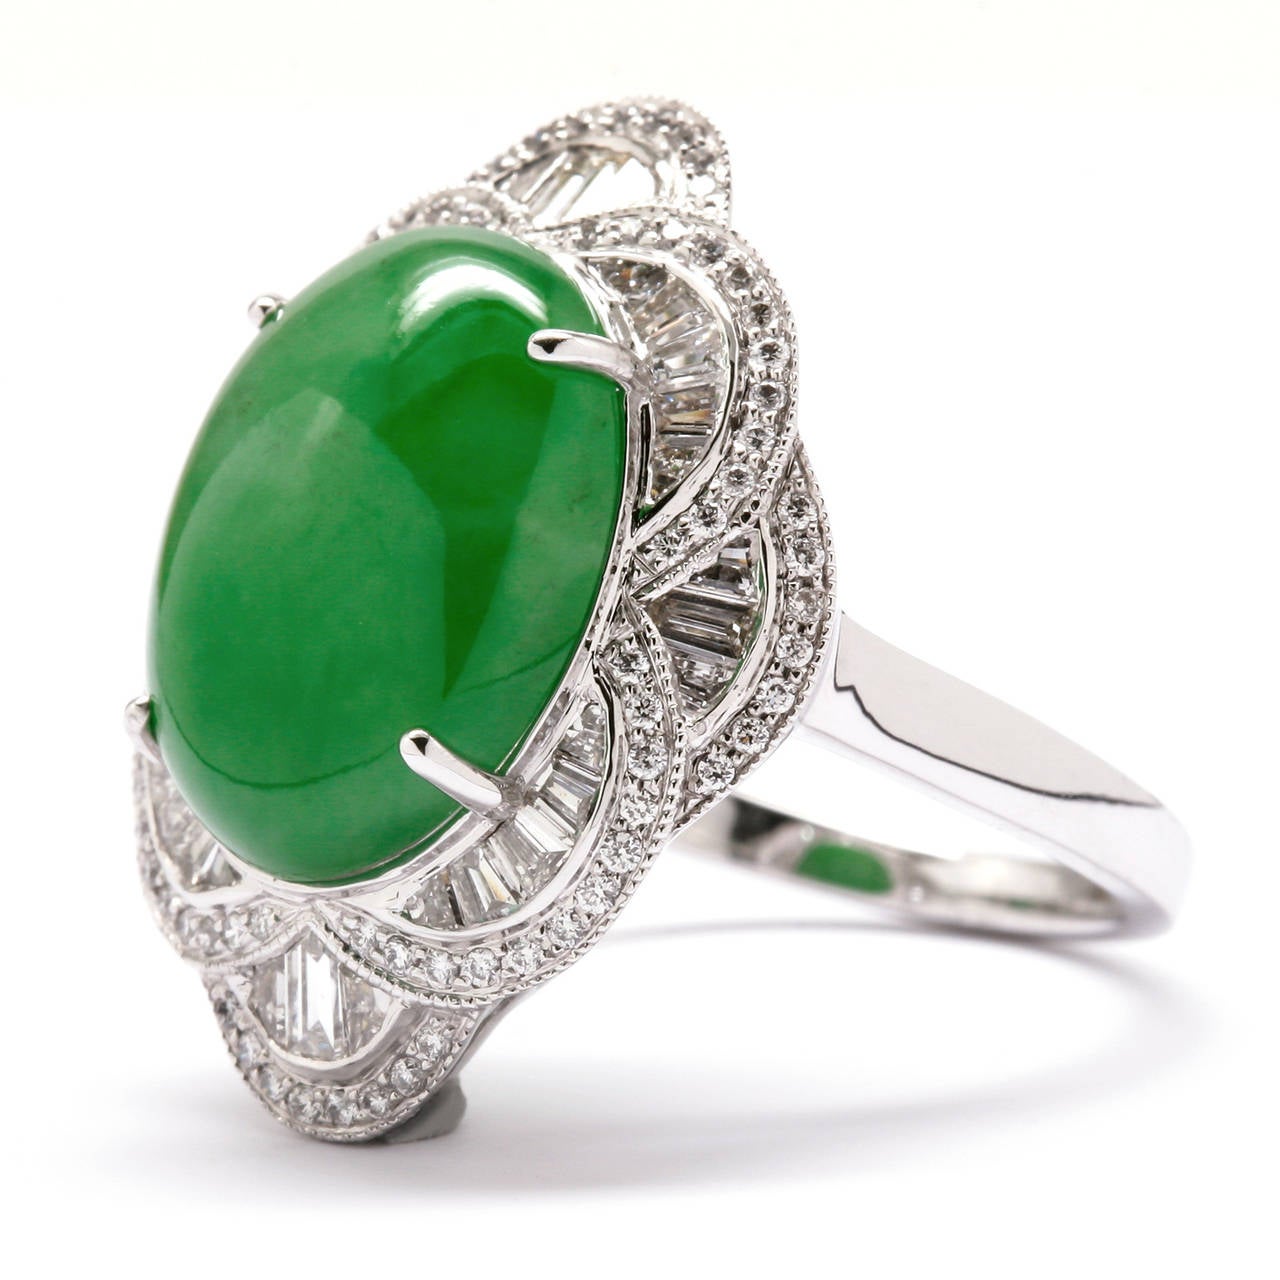 Incredible 7.70ct Jadeite and Diamond(.85ctw) 18kwg Ring. This Jade Cabochon is 14.94x11.69mm and is Certified by the AGTA 94019303.